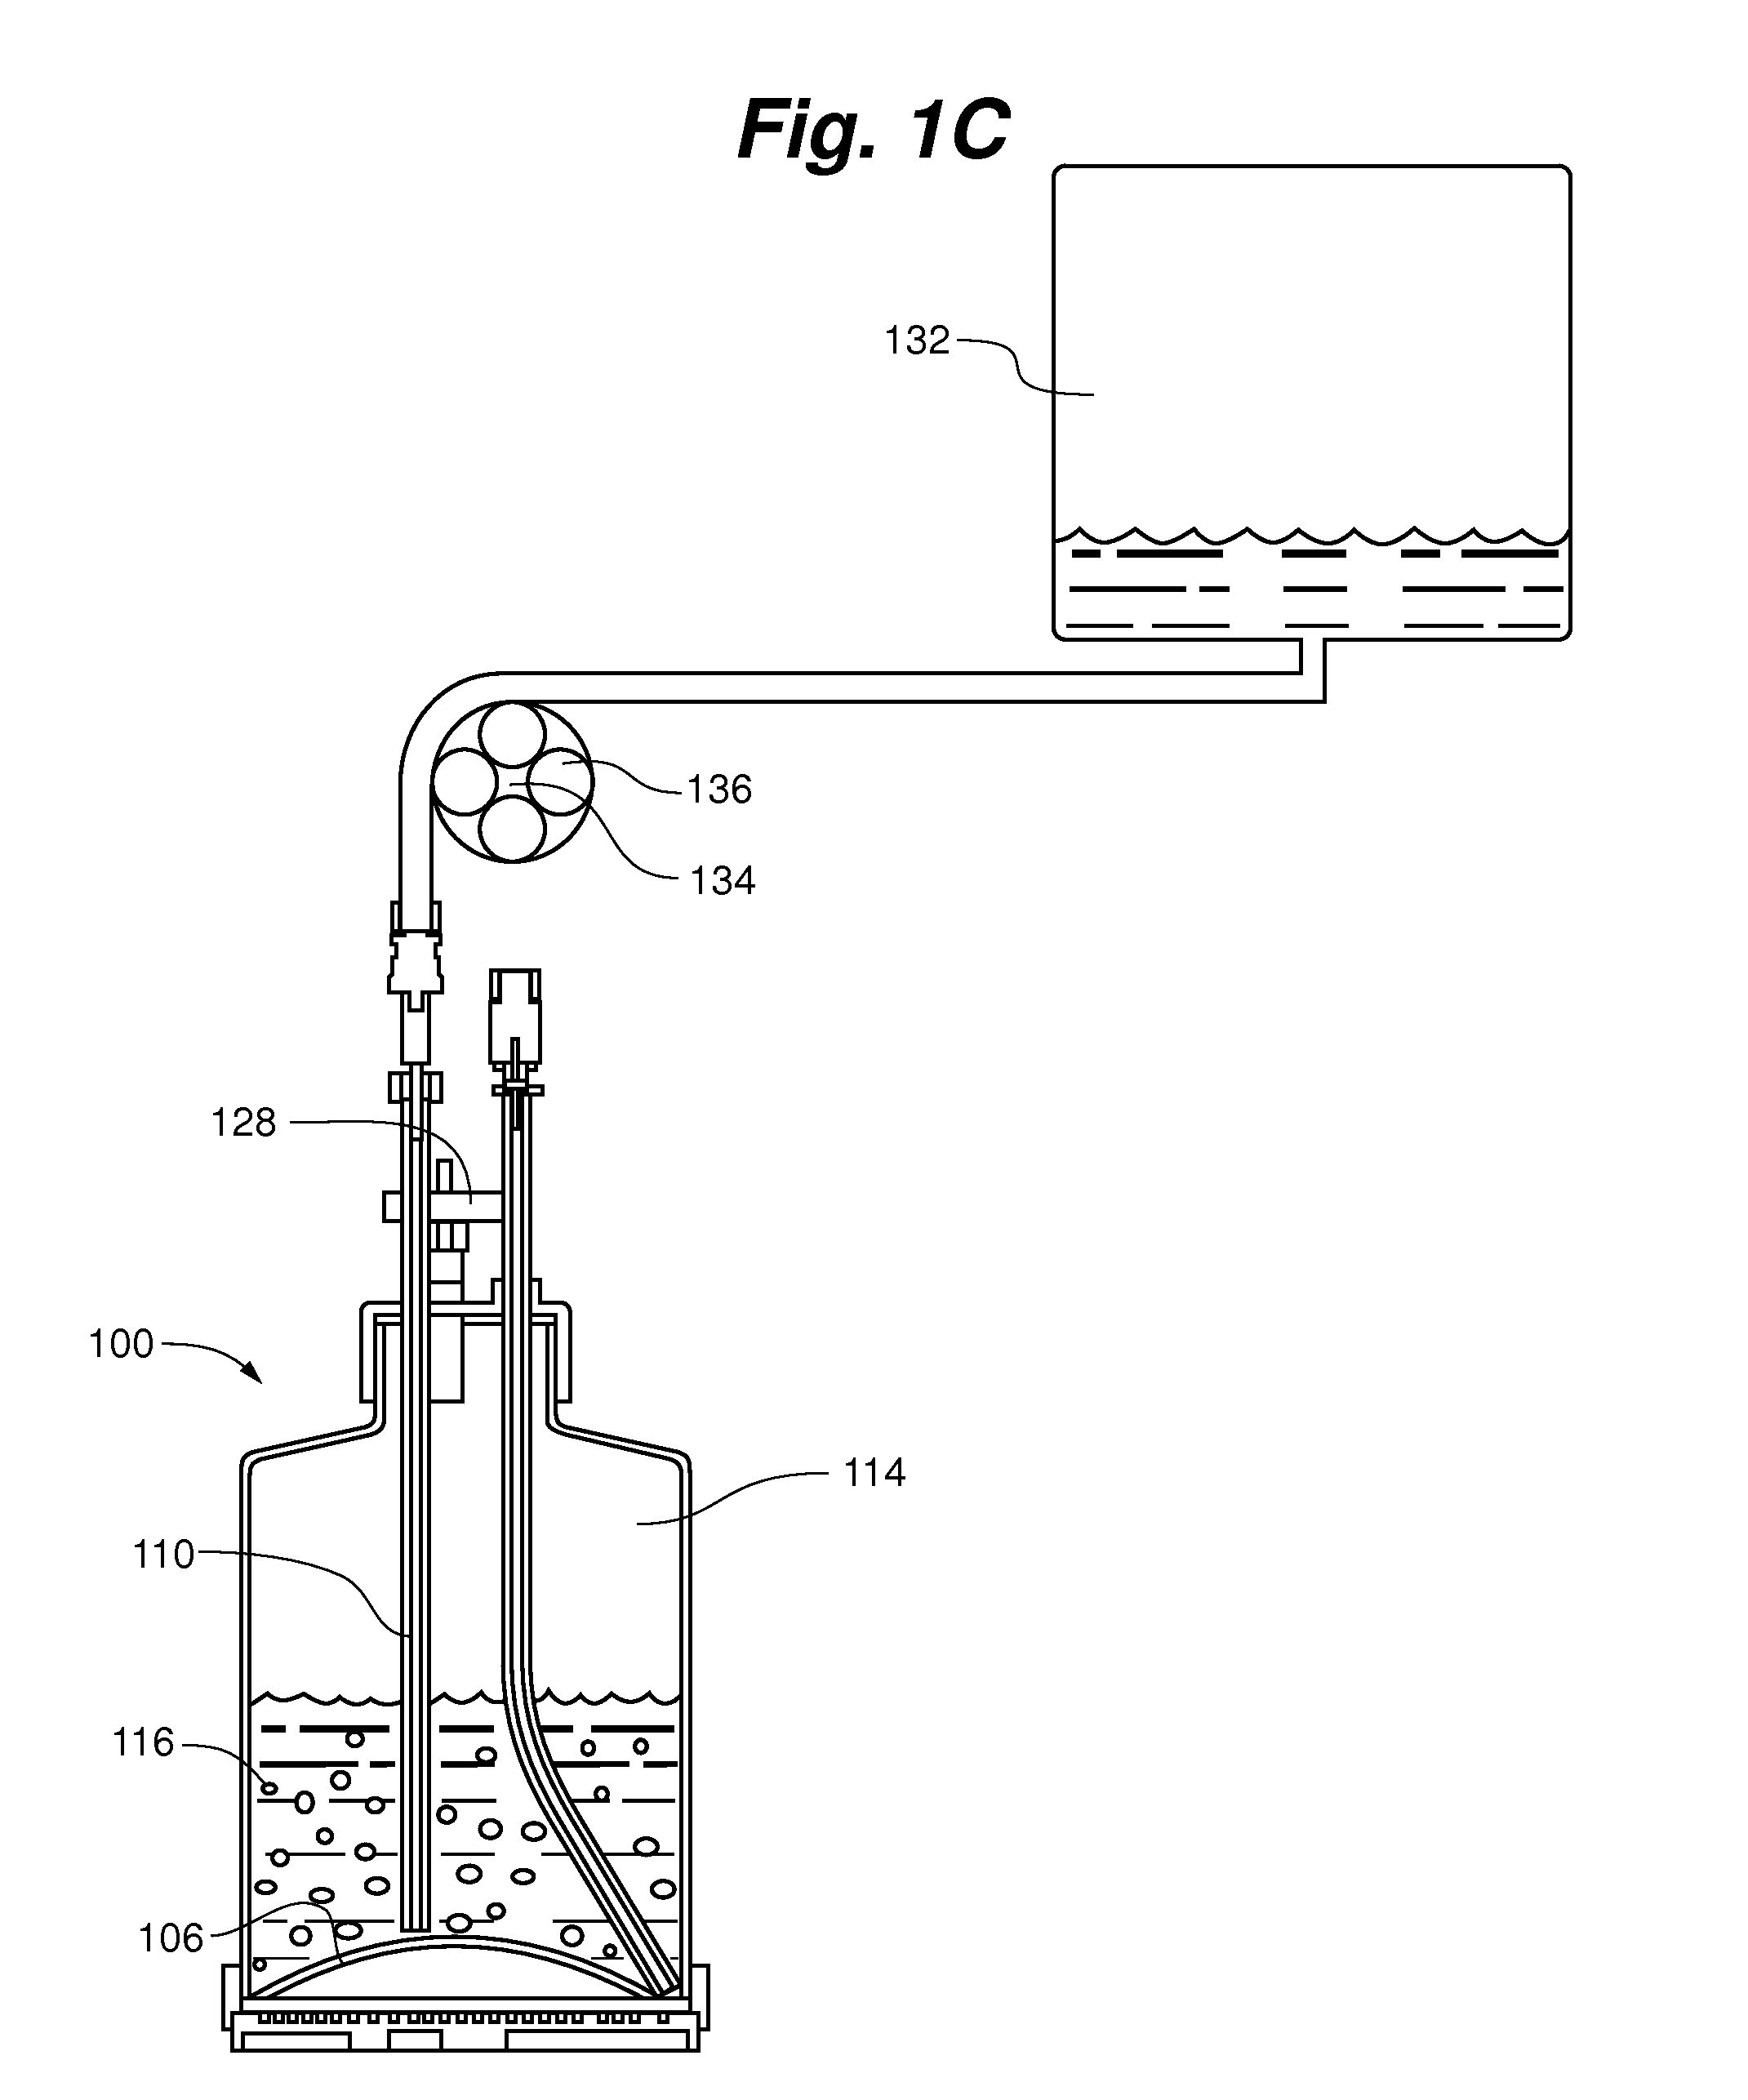 Closed system device and methods for gas permeable cell culture process